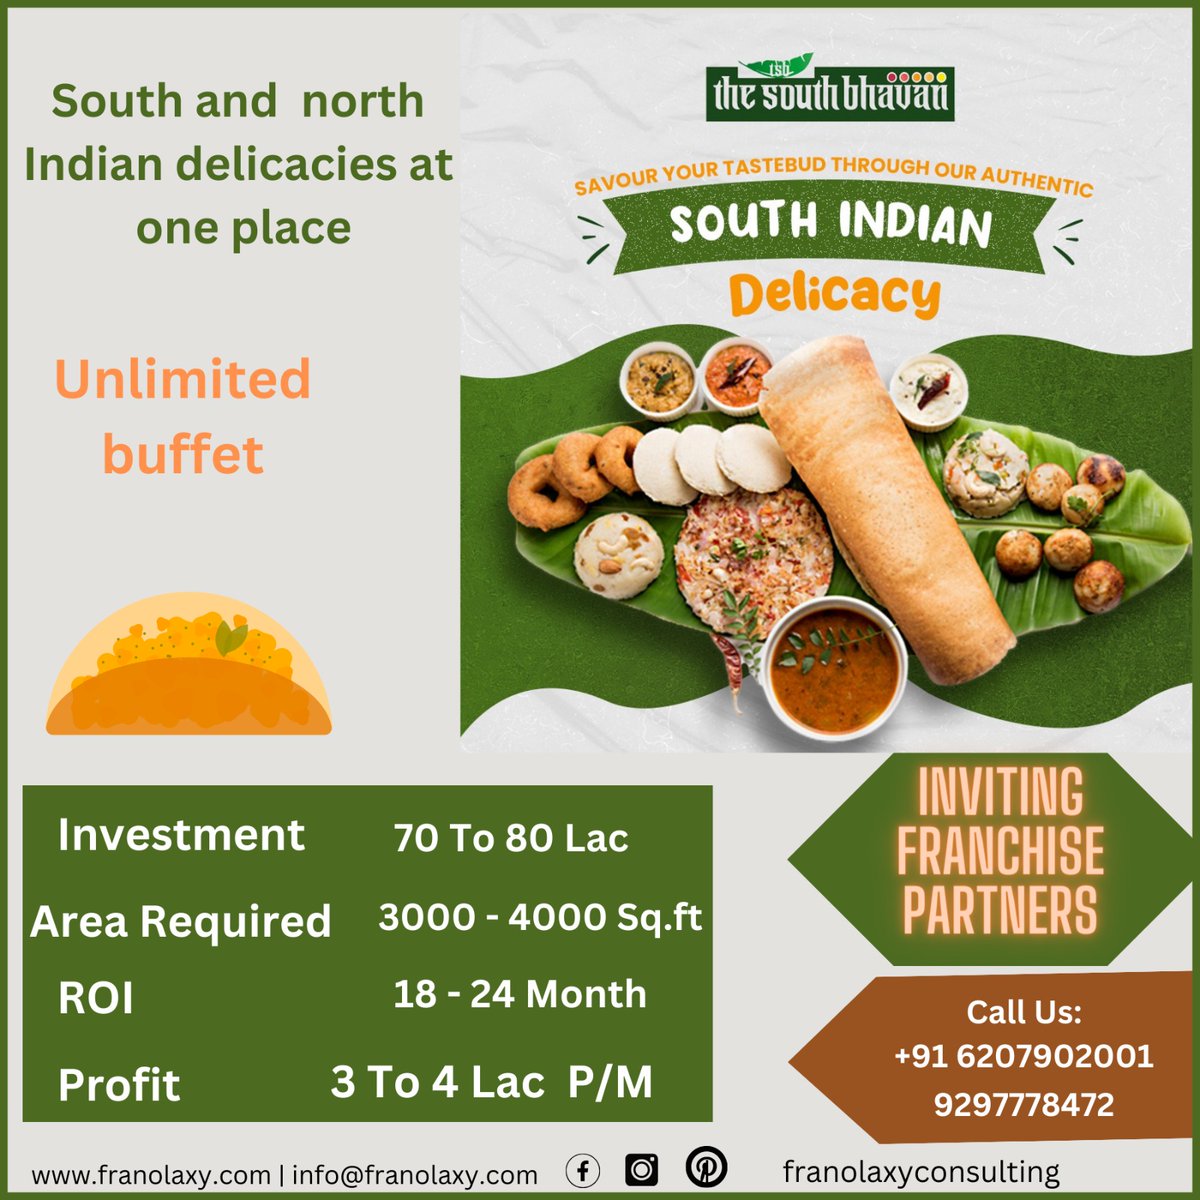 Dosawala Inviting Franchise Partners in India
Start Your Own Authentic South Indian Restaurant
Call us at +91 6207902001 or email us at info@franolaxy.com
#foodfranchise #southindianfoodfranchise #southindianrestaurant #dosawalafranchise #StartYourOwnBusinessNow #StartBusiness